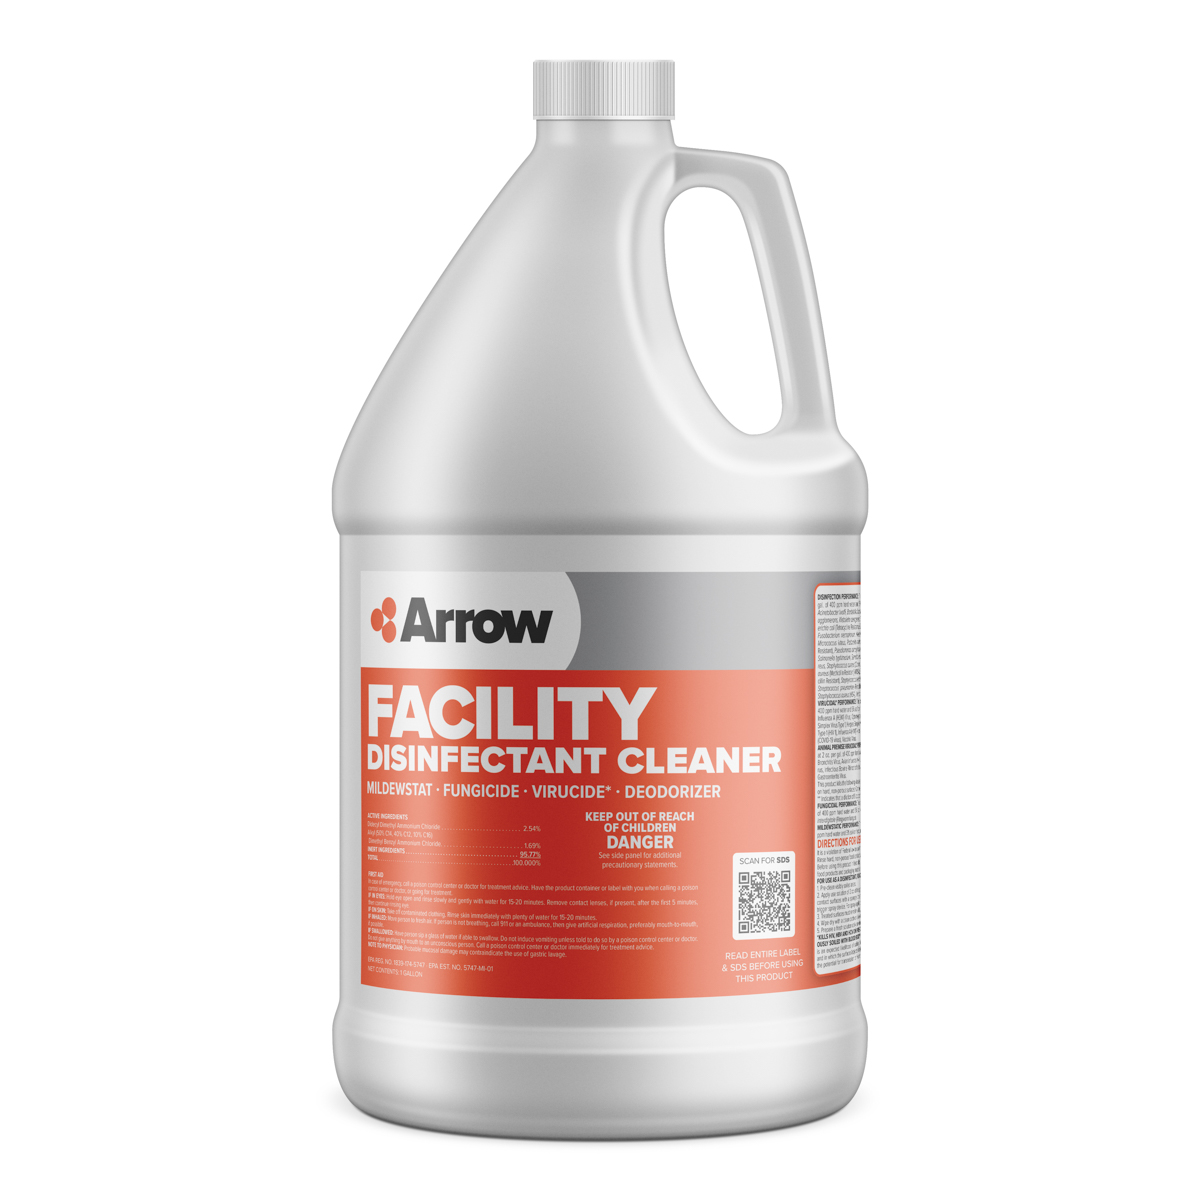 Arrow 250 Facility Disinfectant Cleaner